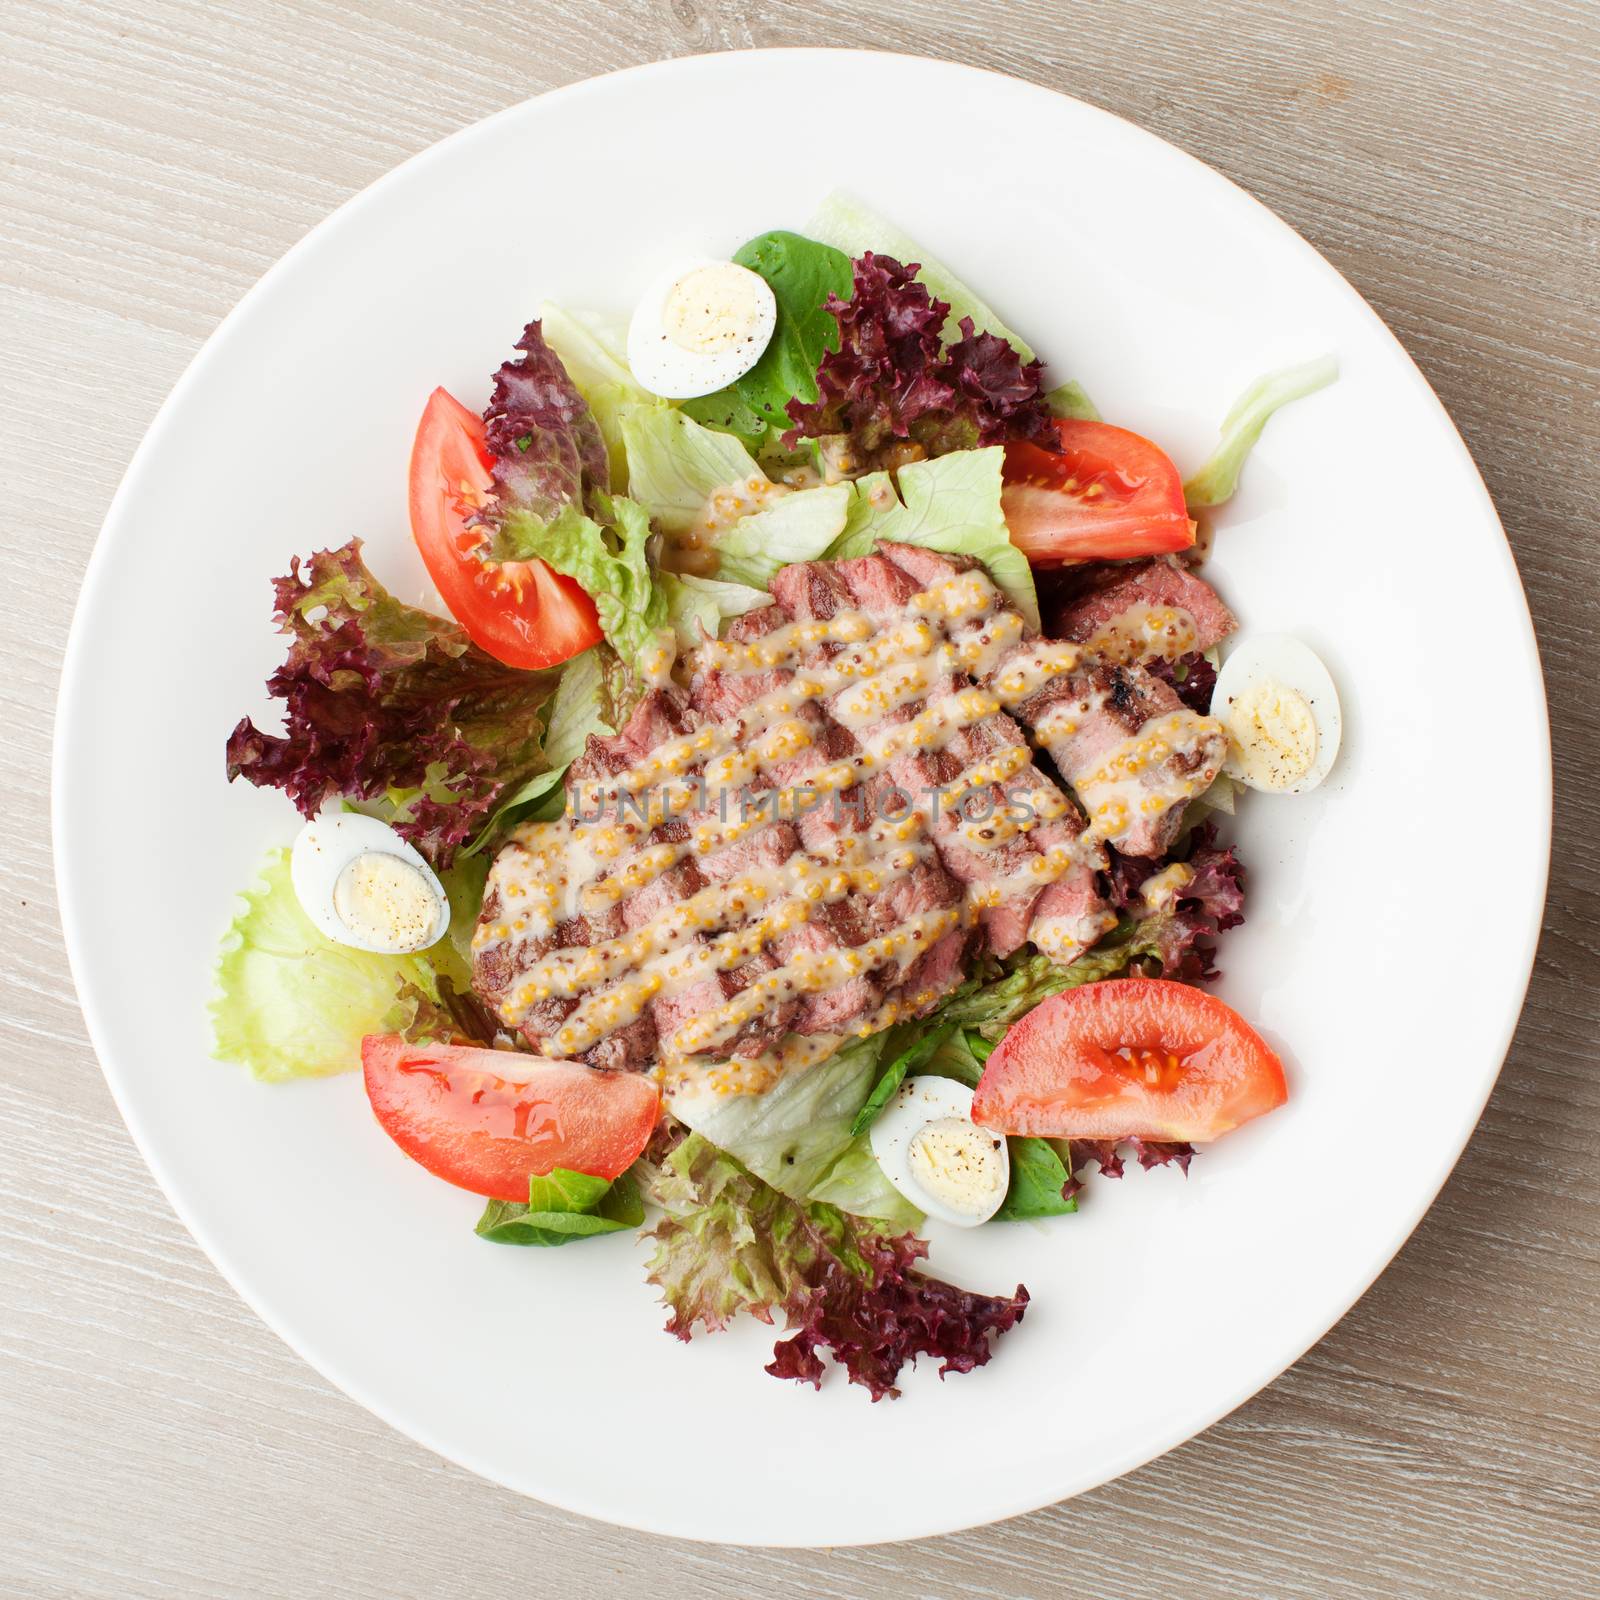 Fresh beef salad with lettuce, tomatoes, boiled eggs, mustard sa by SergeyAK